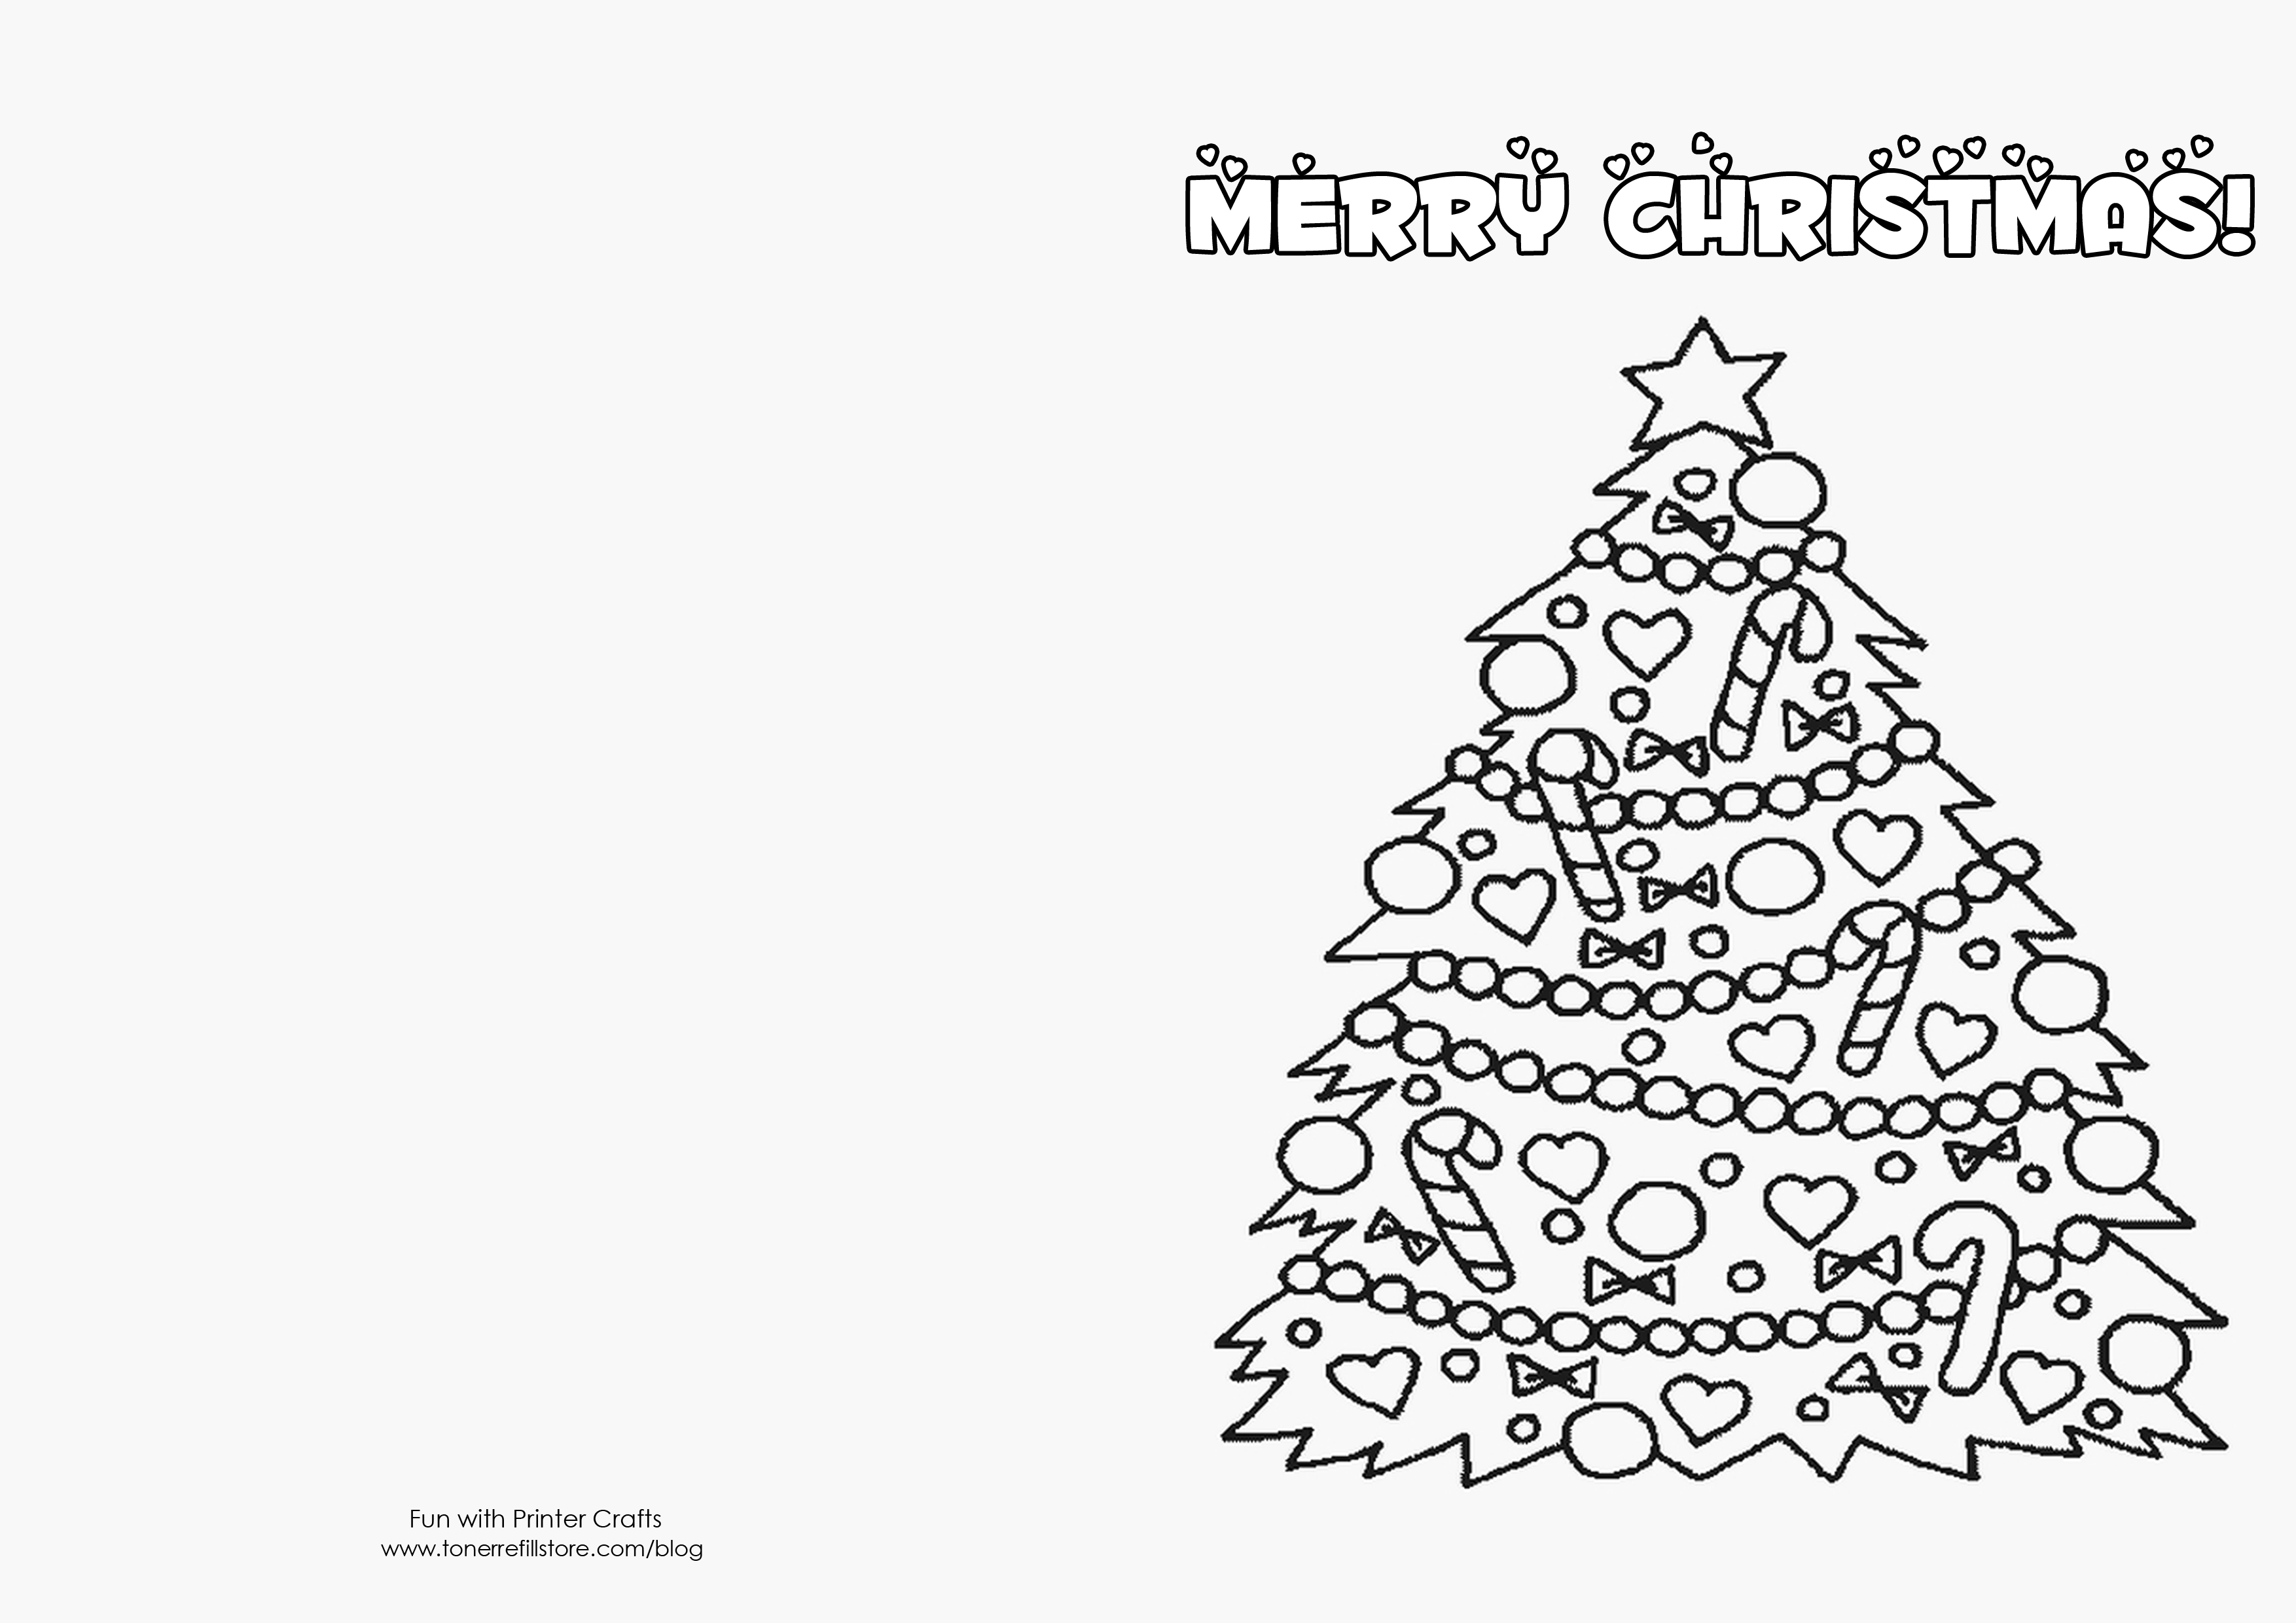 How To Make Printable Christmas Cards For Kids To Color Fun With